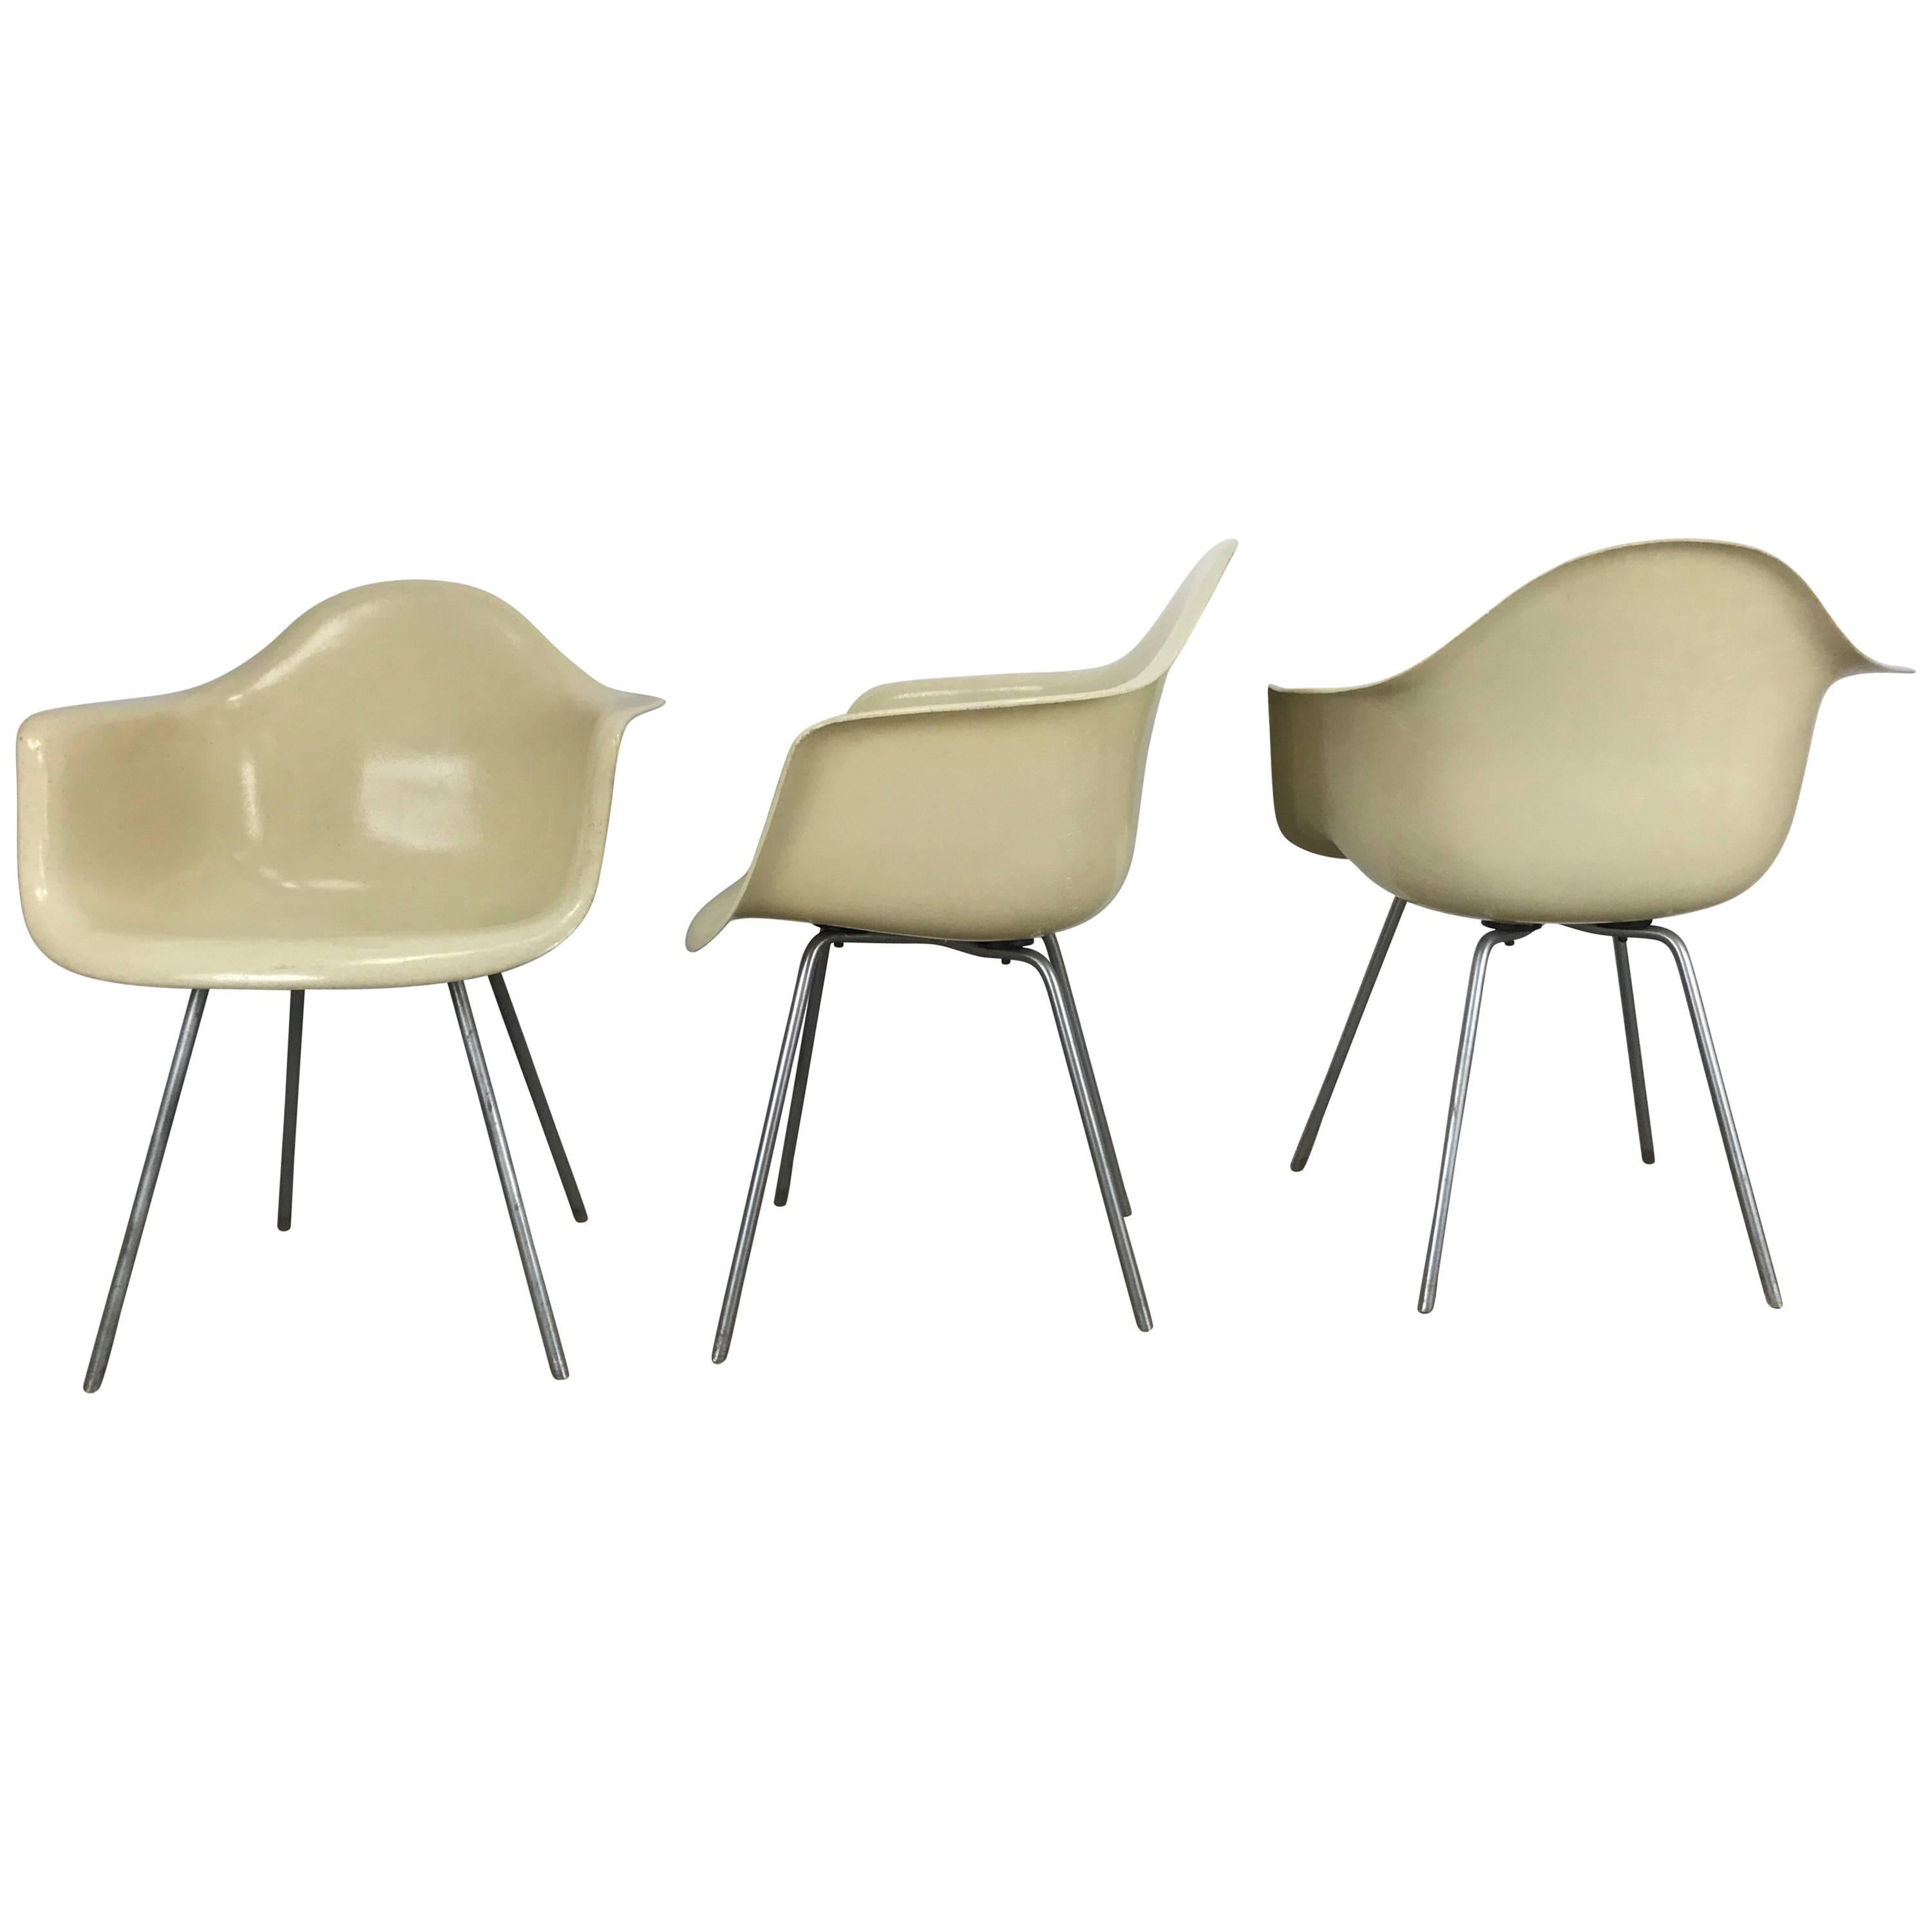 Classic Modernist Charles and Ray Eames Arm Shell Chairs, D A X